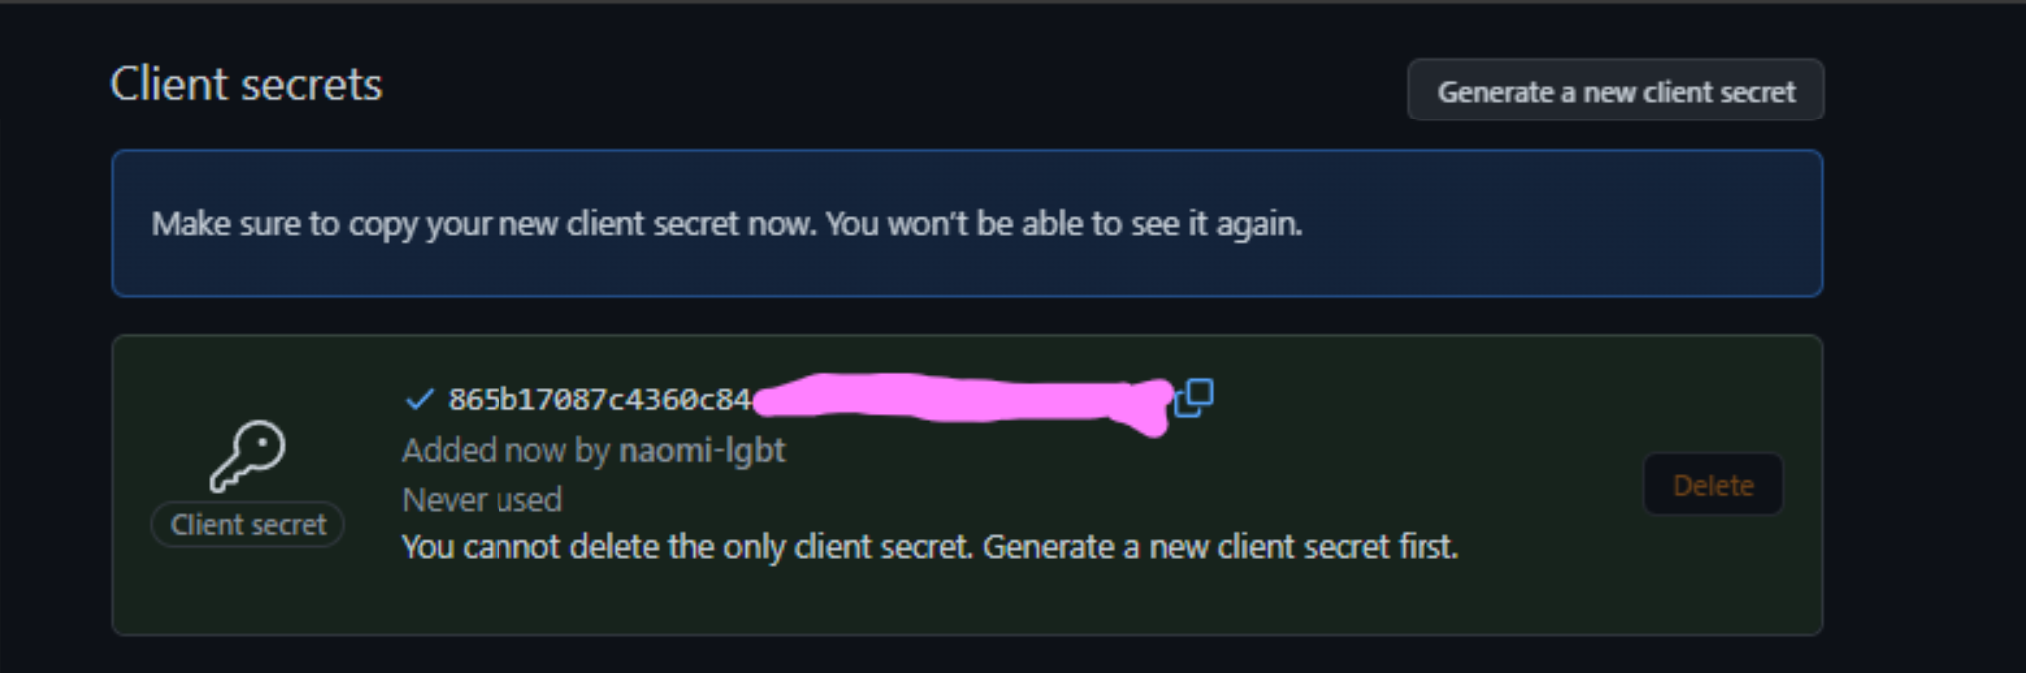 The new client secret (obfuscated for security in this image)